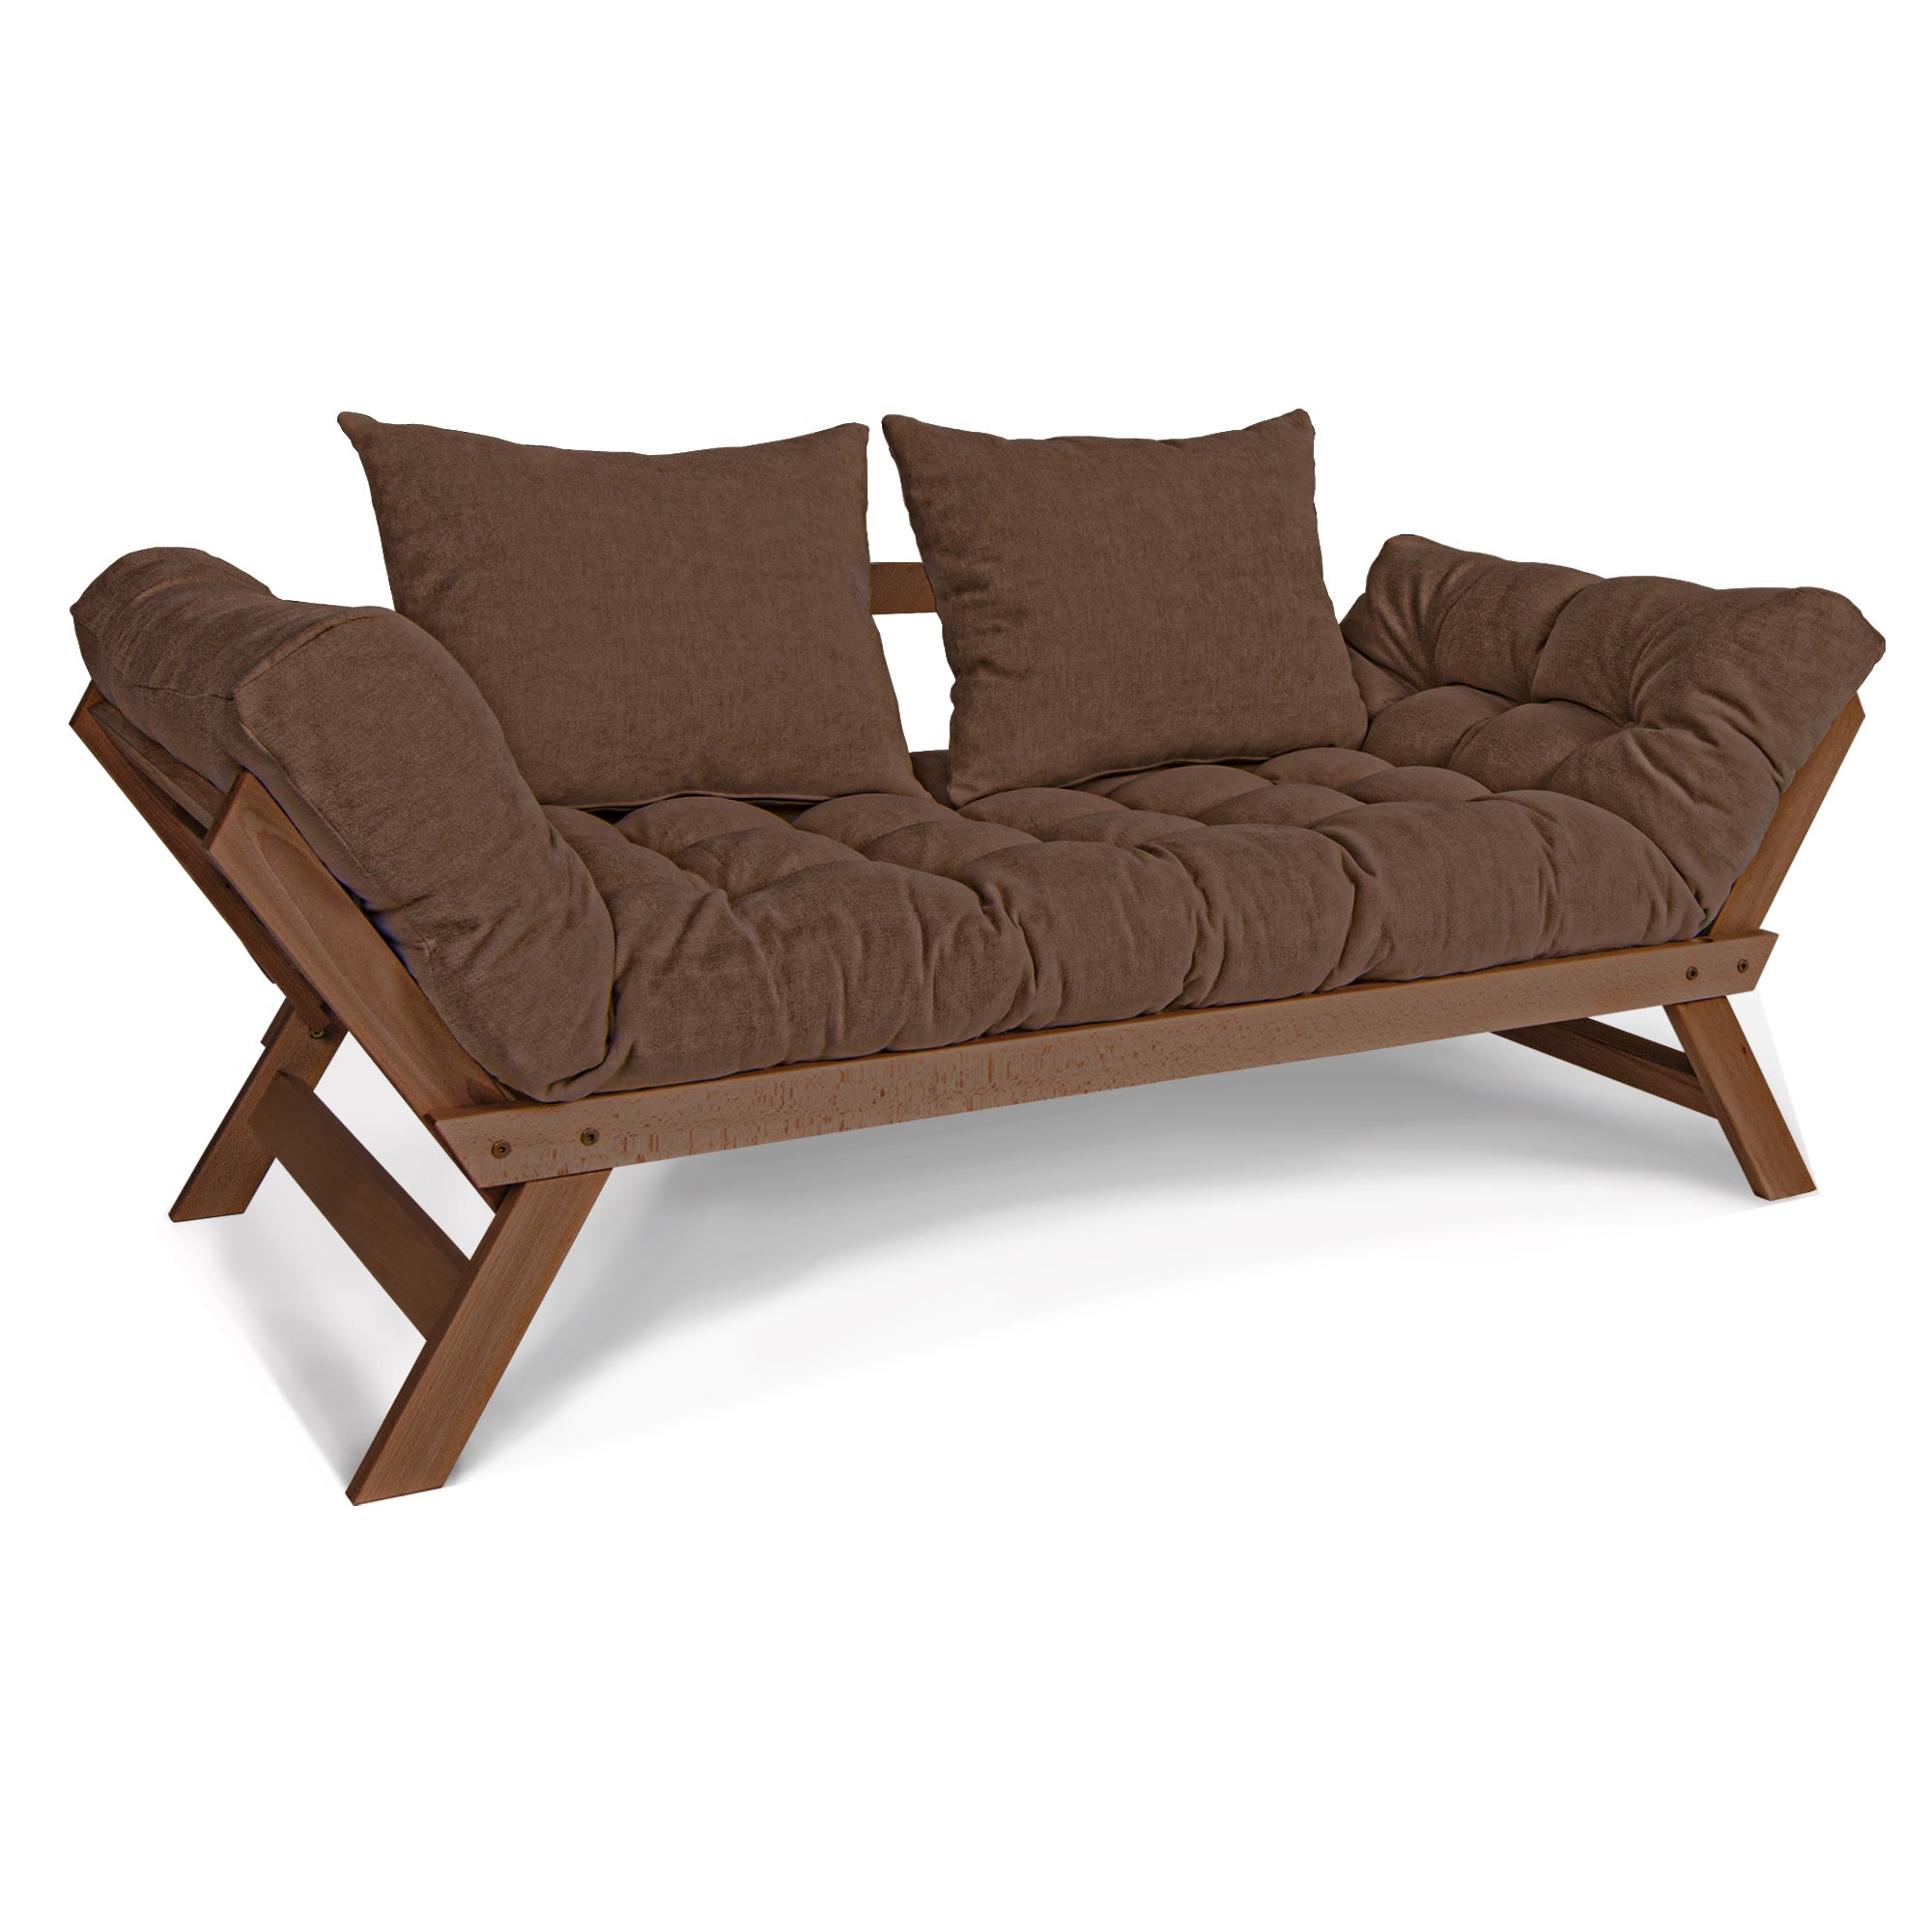 ALLEGRO Folding Sofa Bed, Beech Wood Frame, Walnut Colour upholstery brown